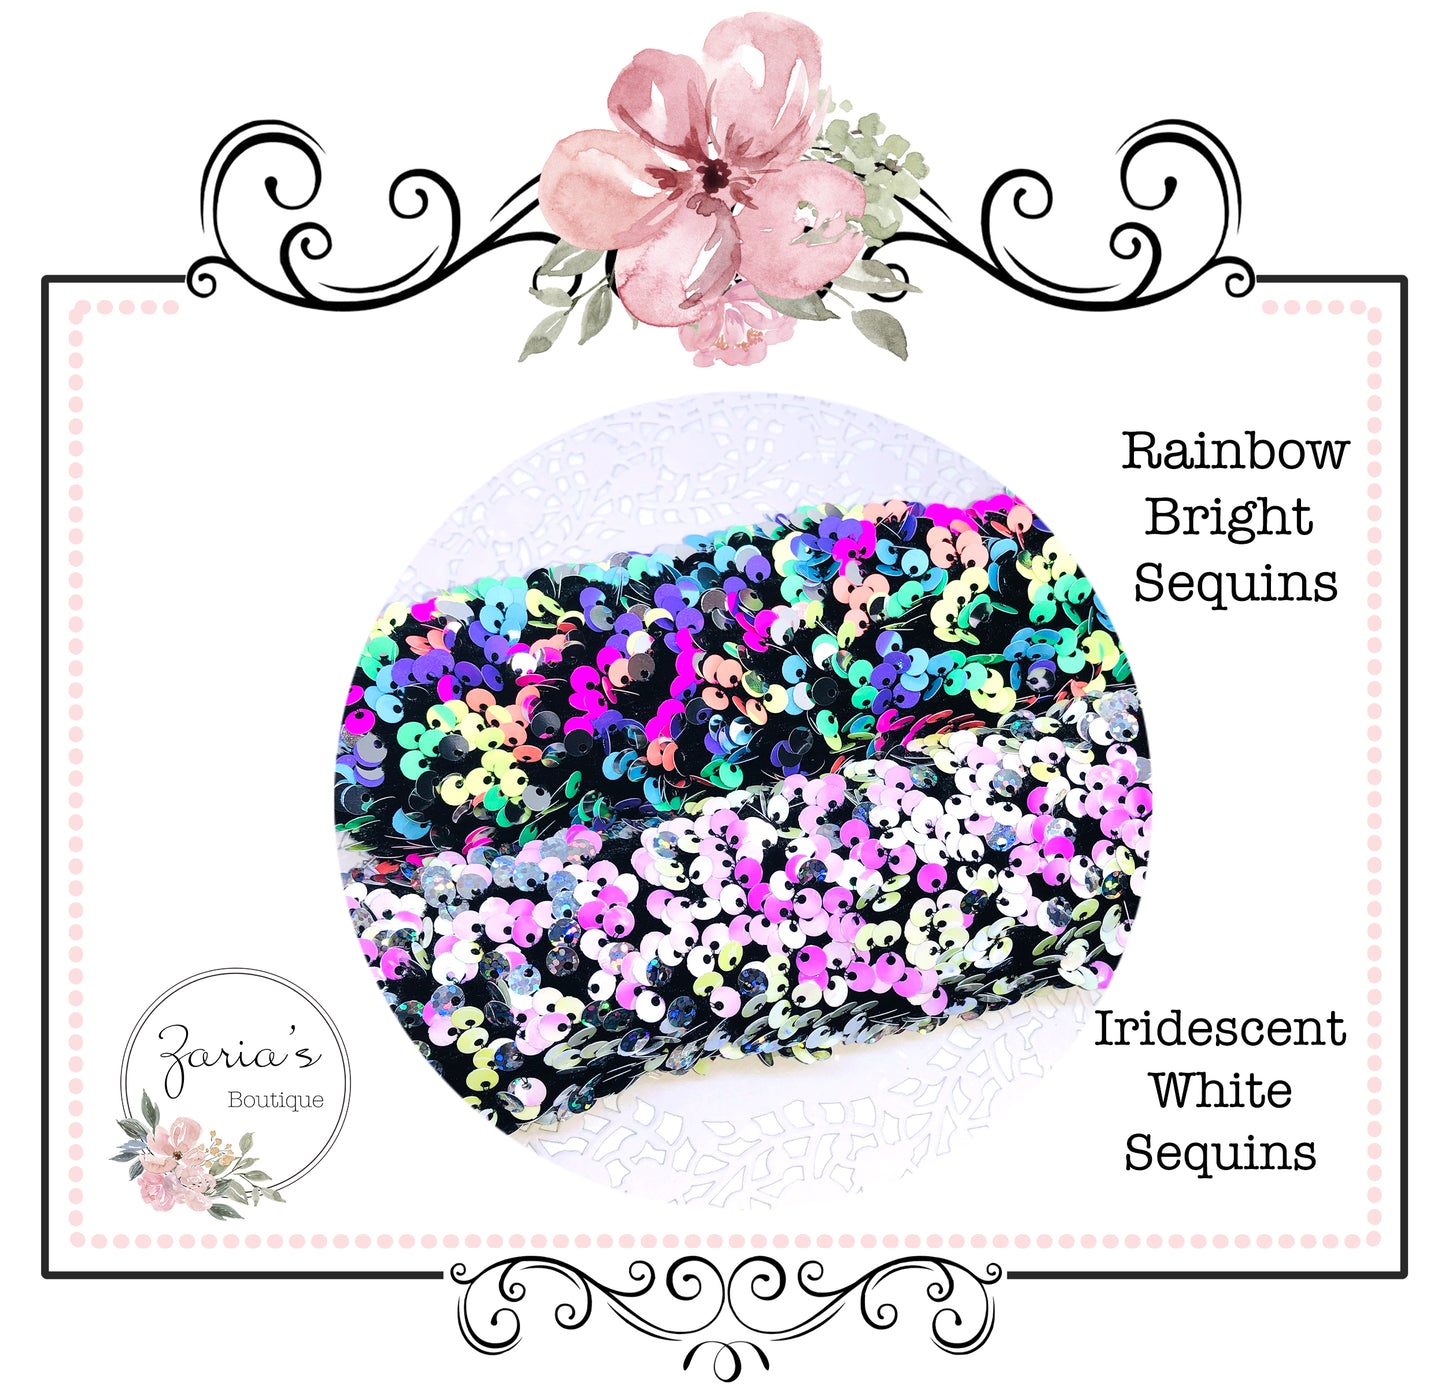 Iridescent Sequin Bow Fabric ~ White or Rainbow Brights